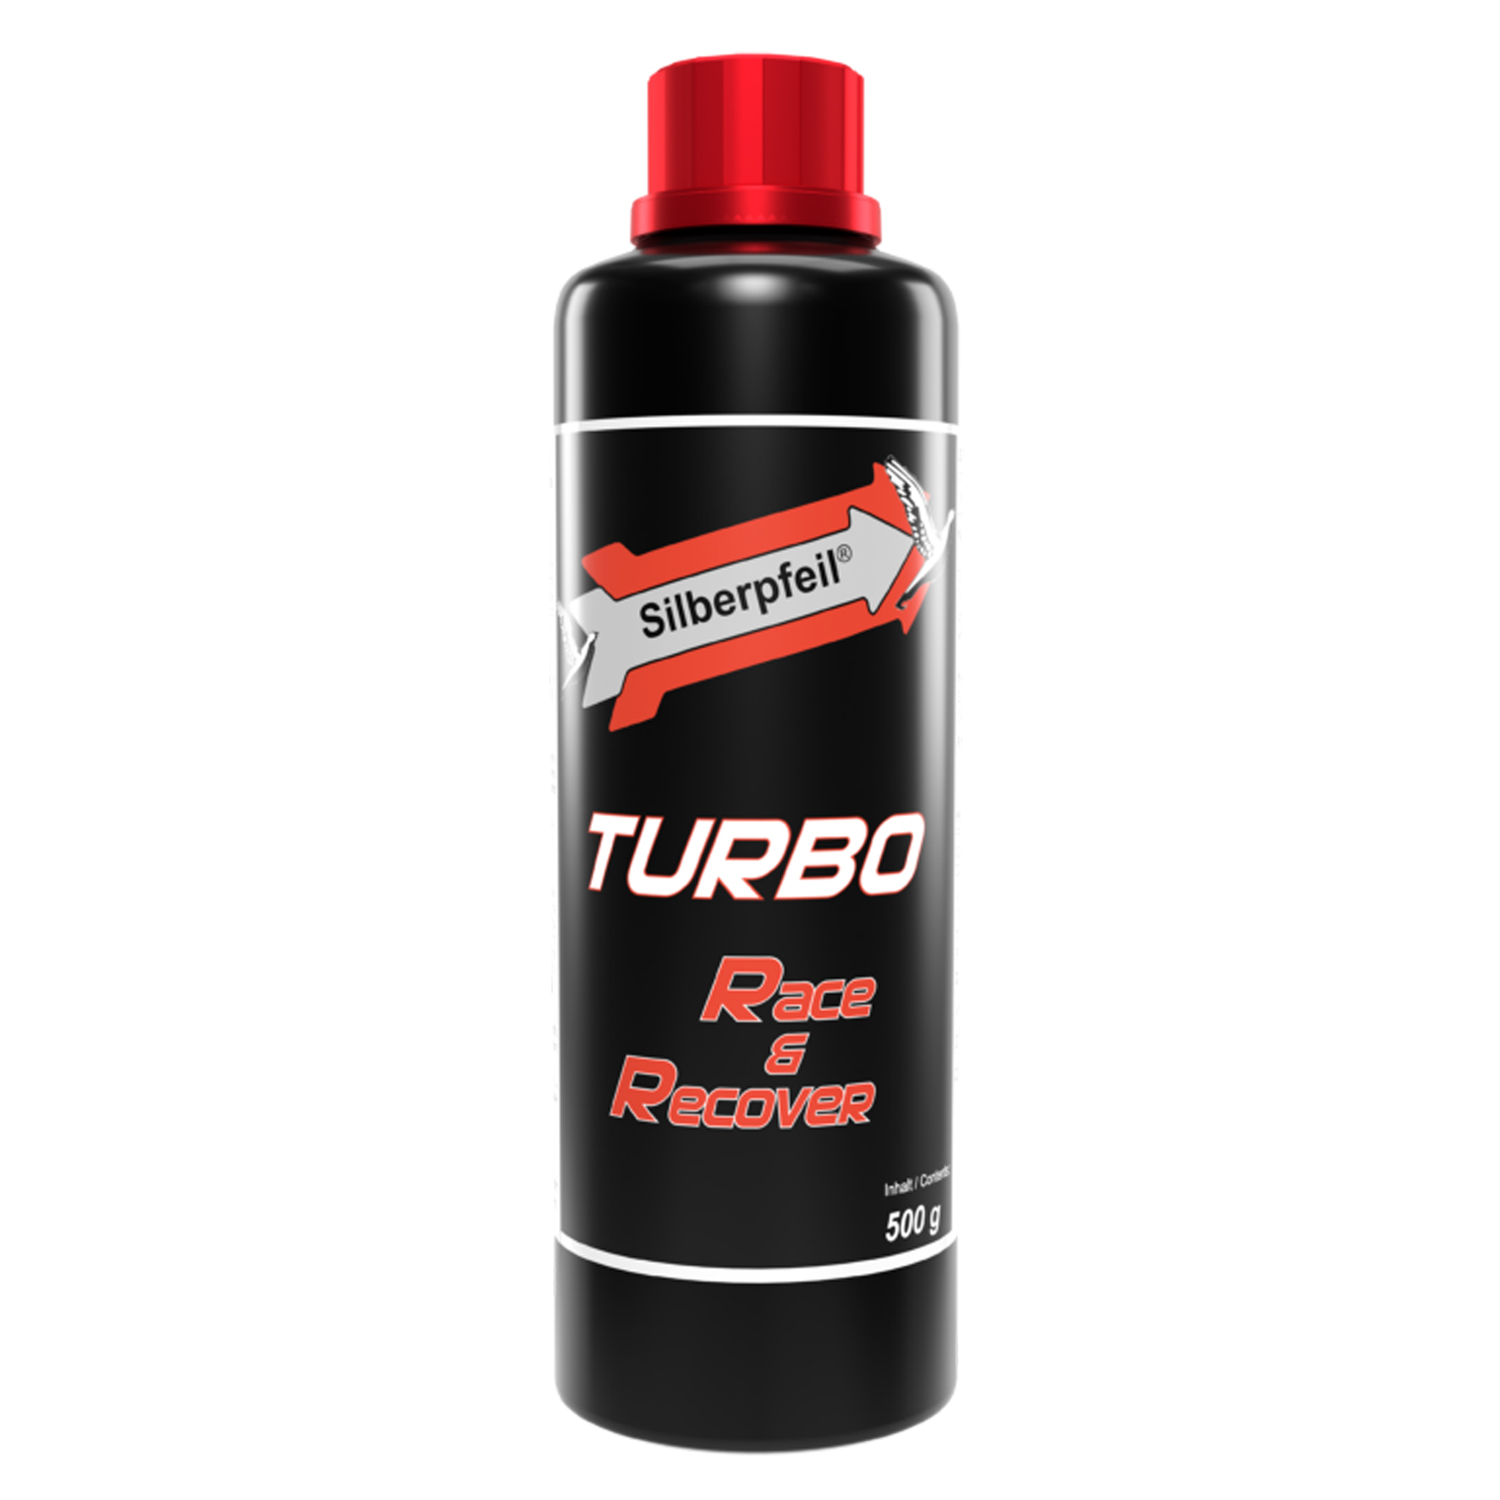 SILBERPFEIL TURBO RR – Race and Recover, 500g